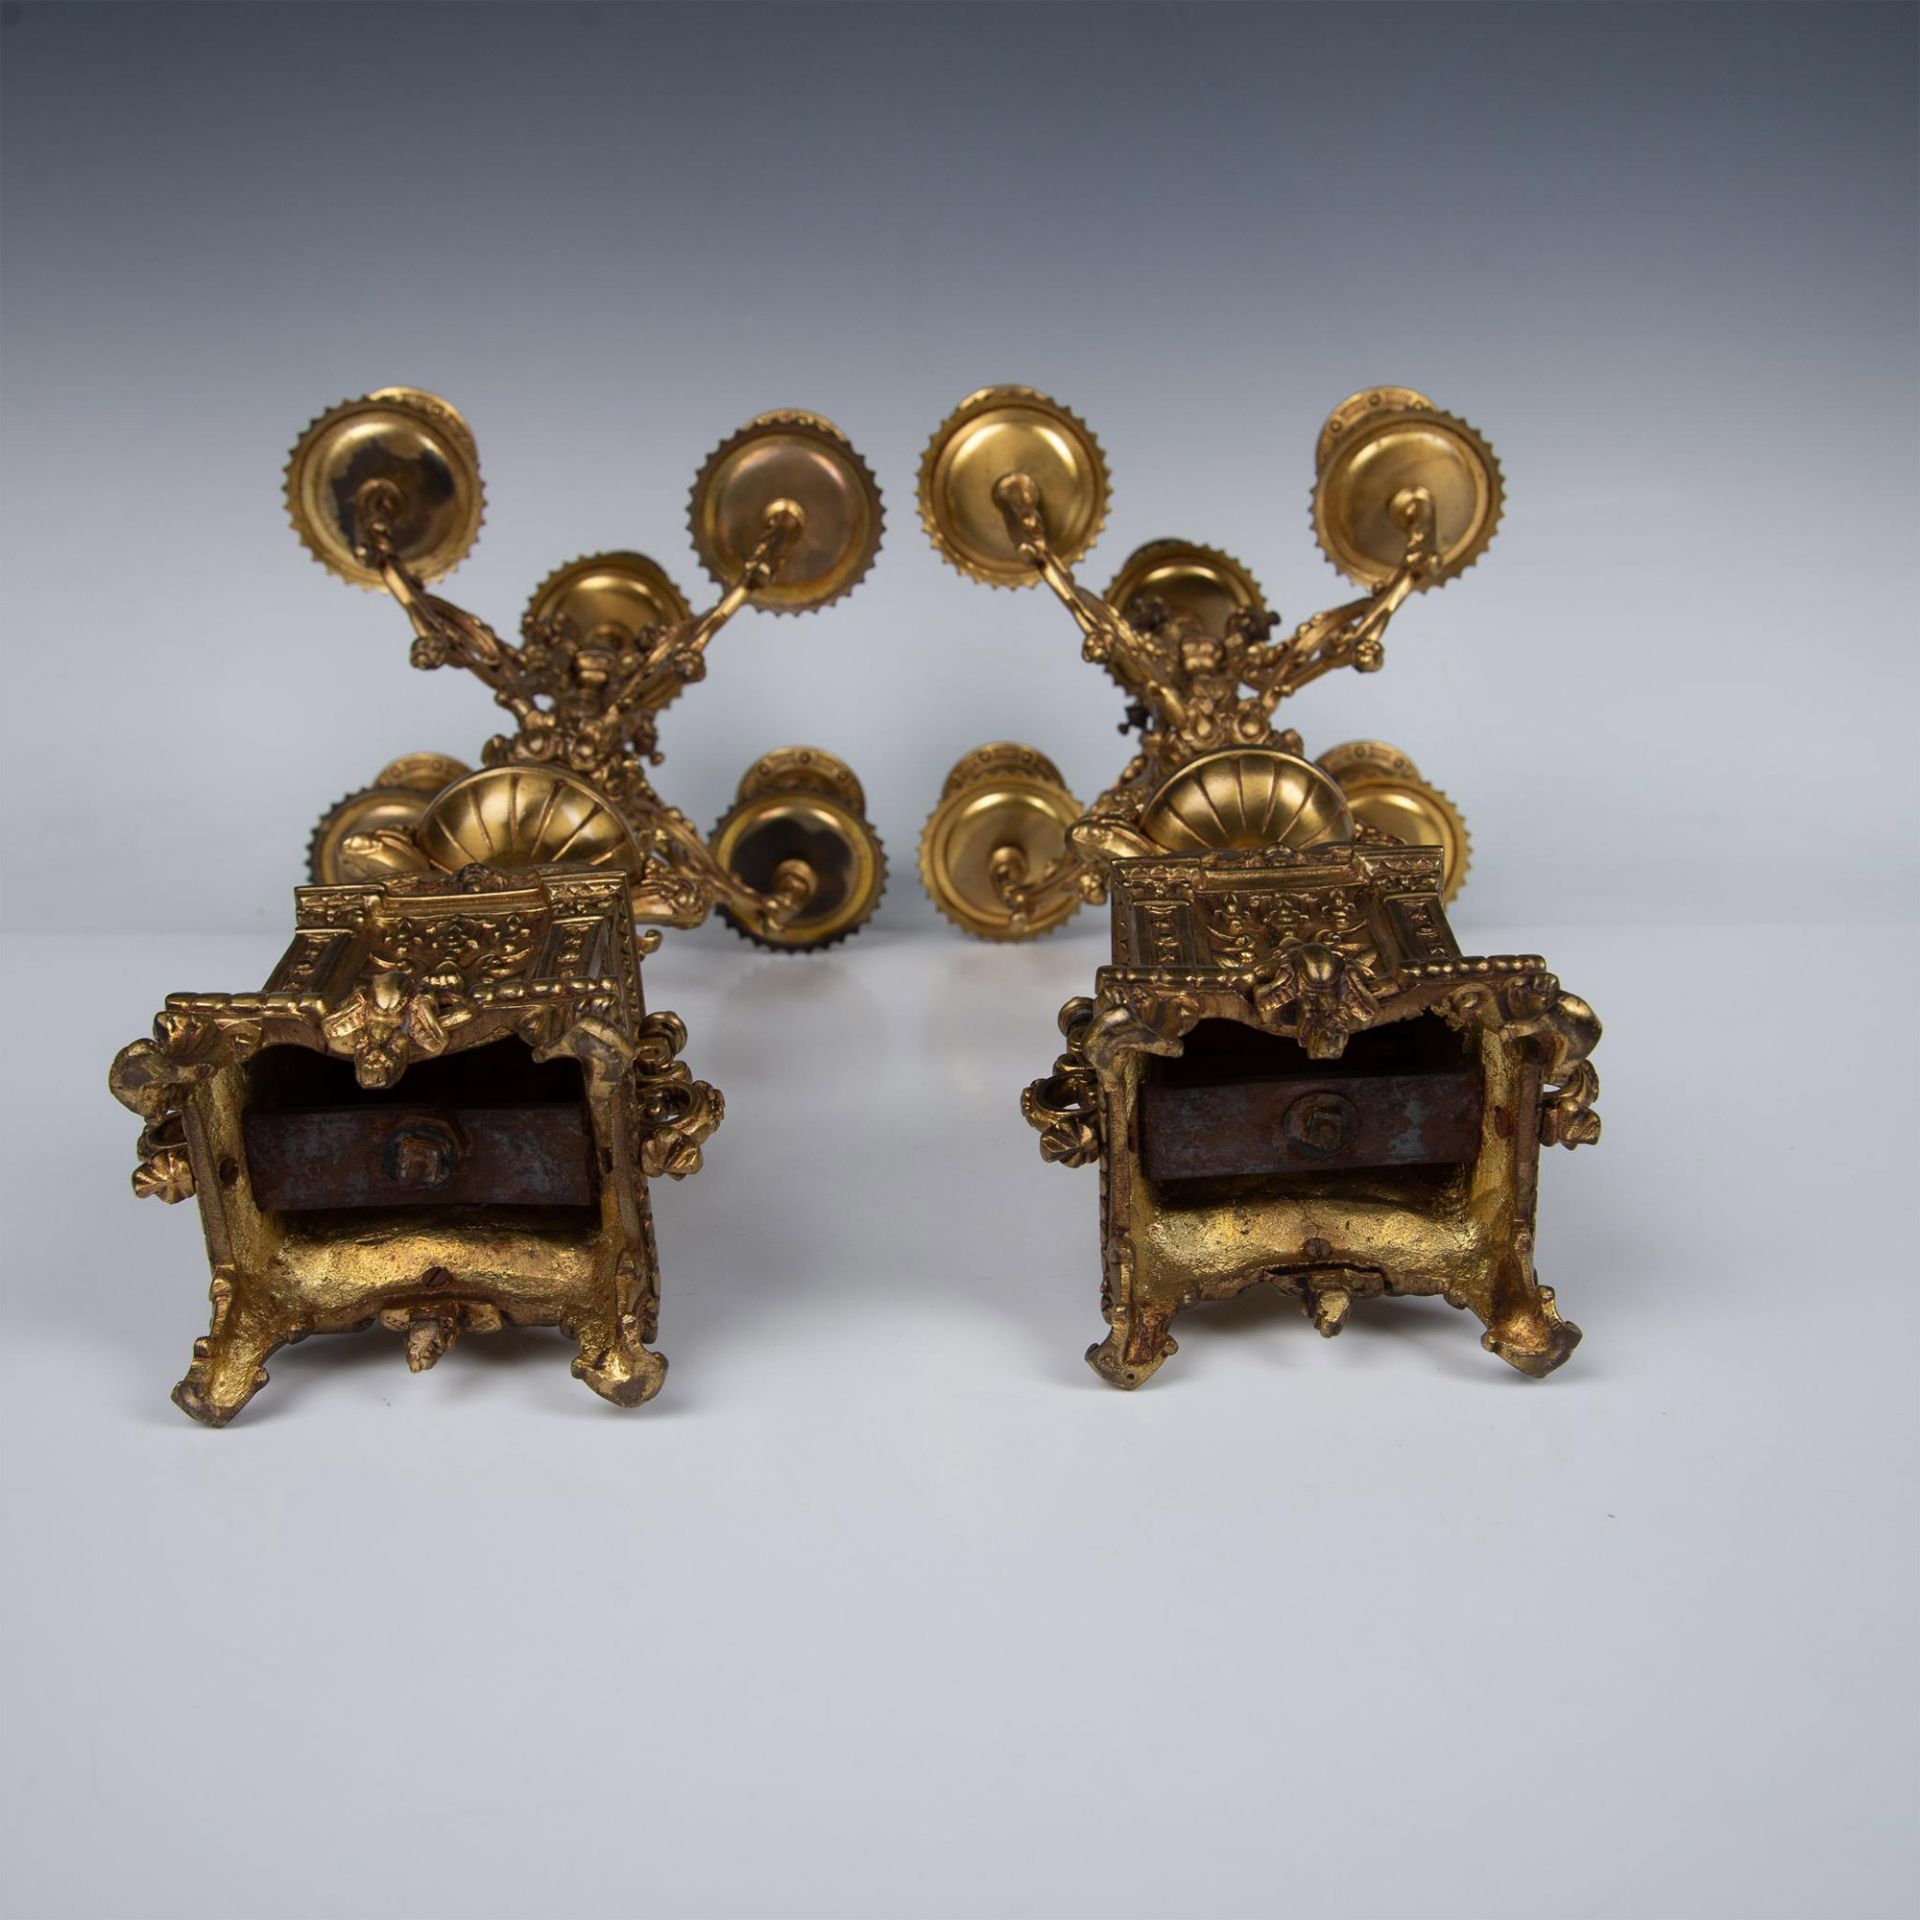 Pair of Brass Baroque Style Mantel Candelabras - Image 7 of 7